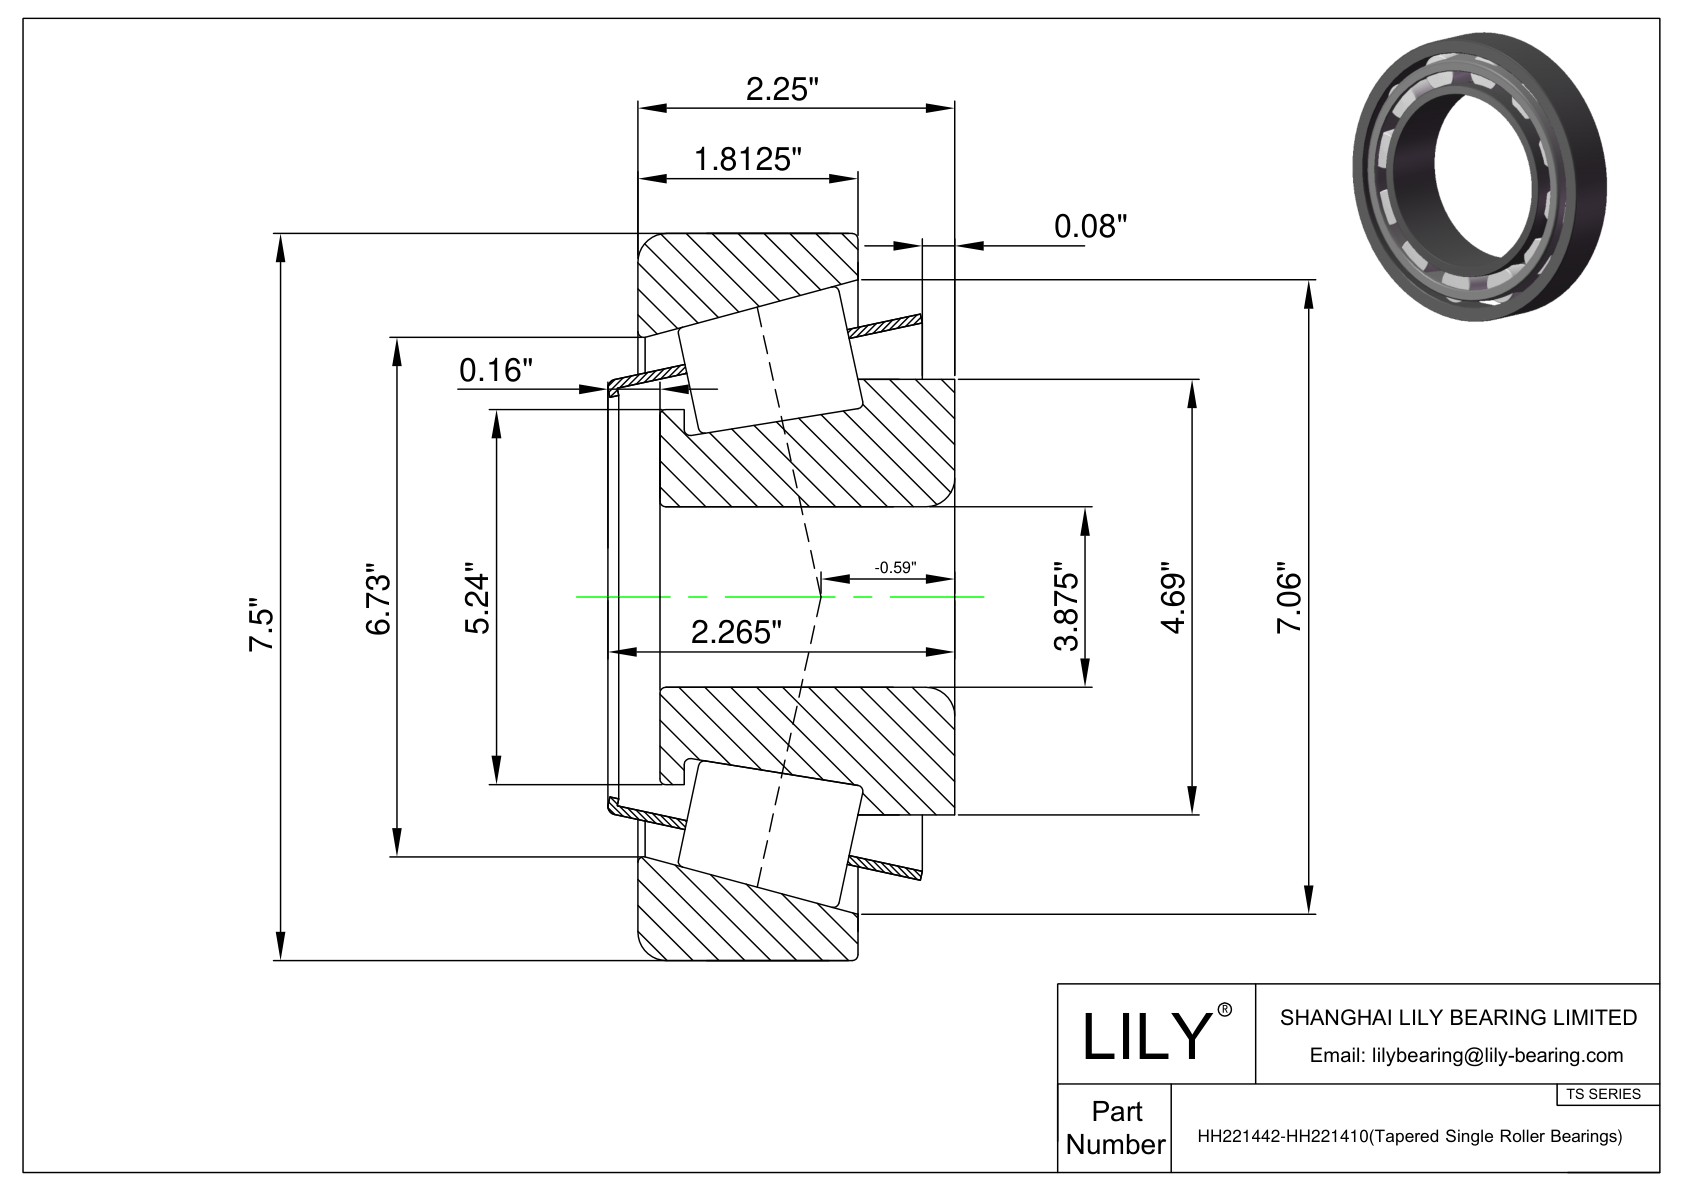 HH221442-HH221410 TS (Tapered Single Roller Bearings) (Imperial) cad drawing